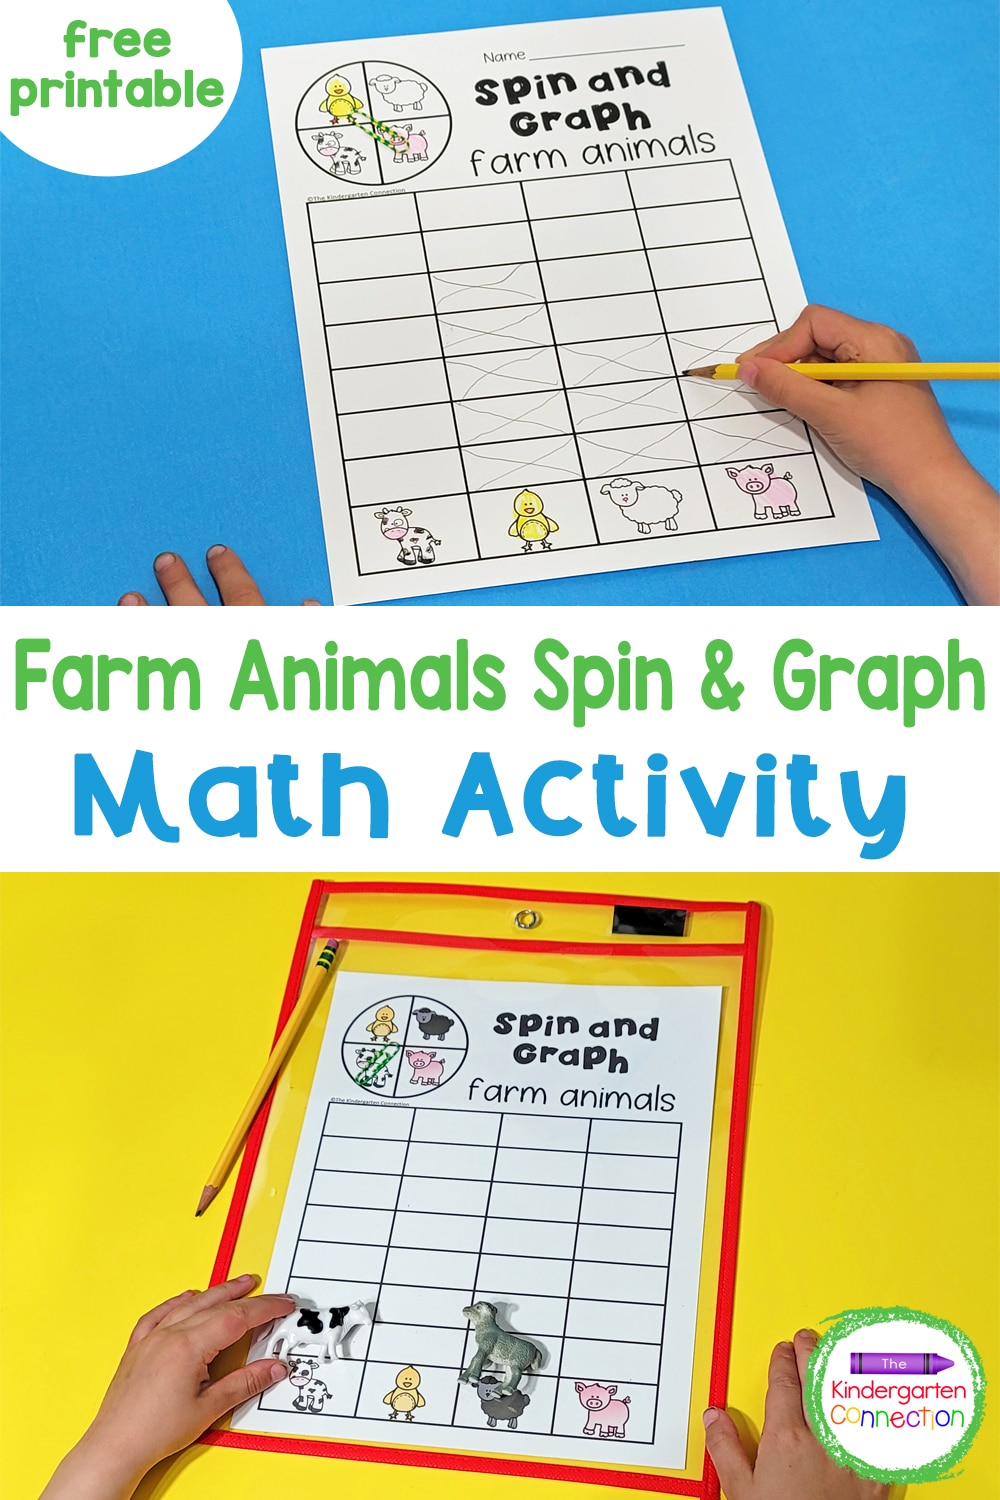 This free Farm Animal Spin and Graph Activity is a great way to get graphing practice in while having fun too!